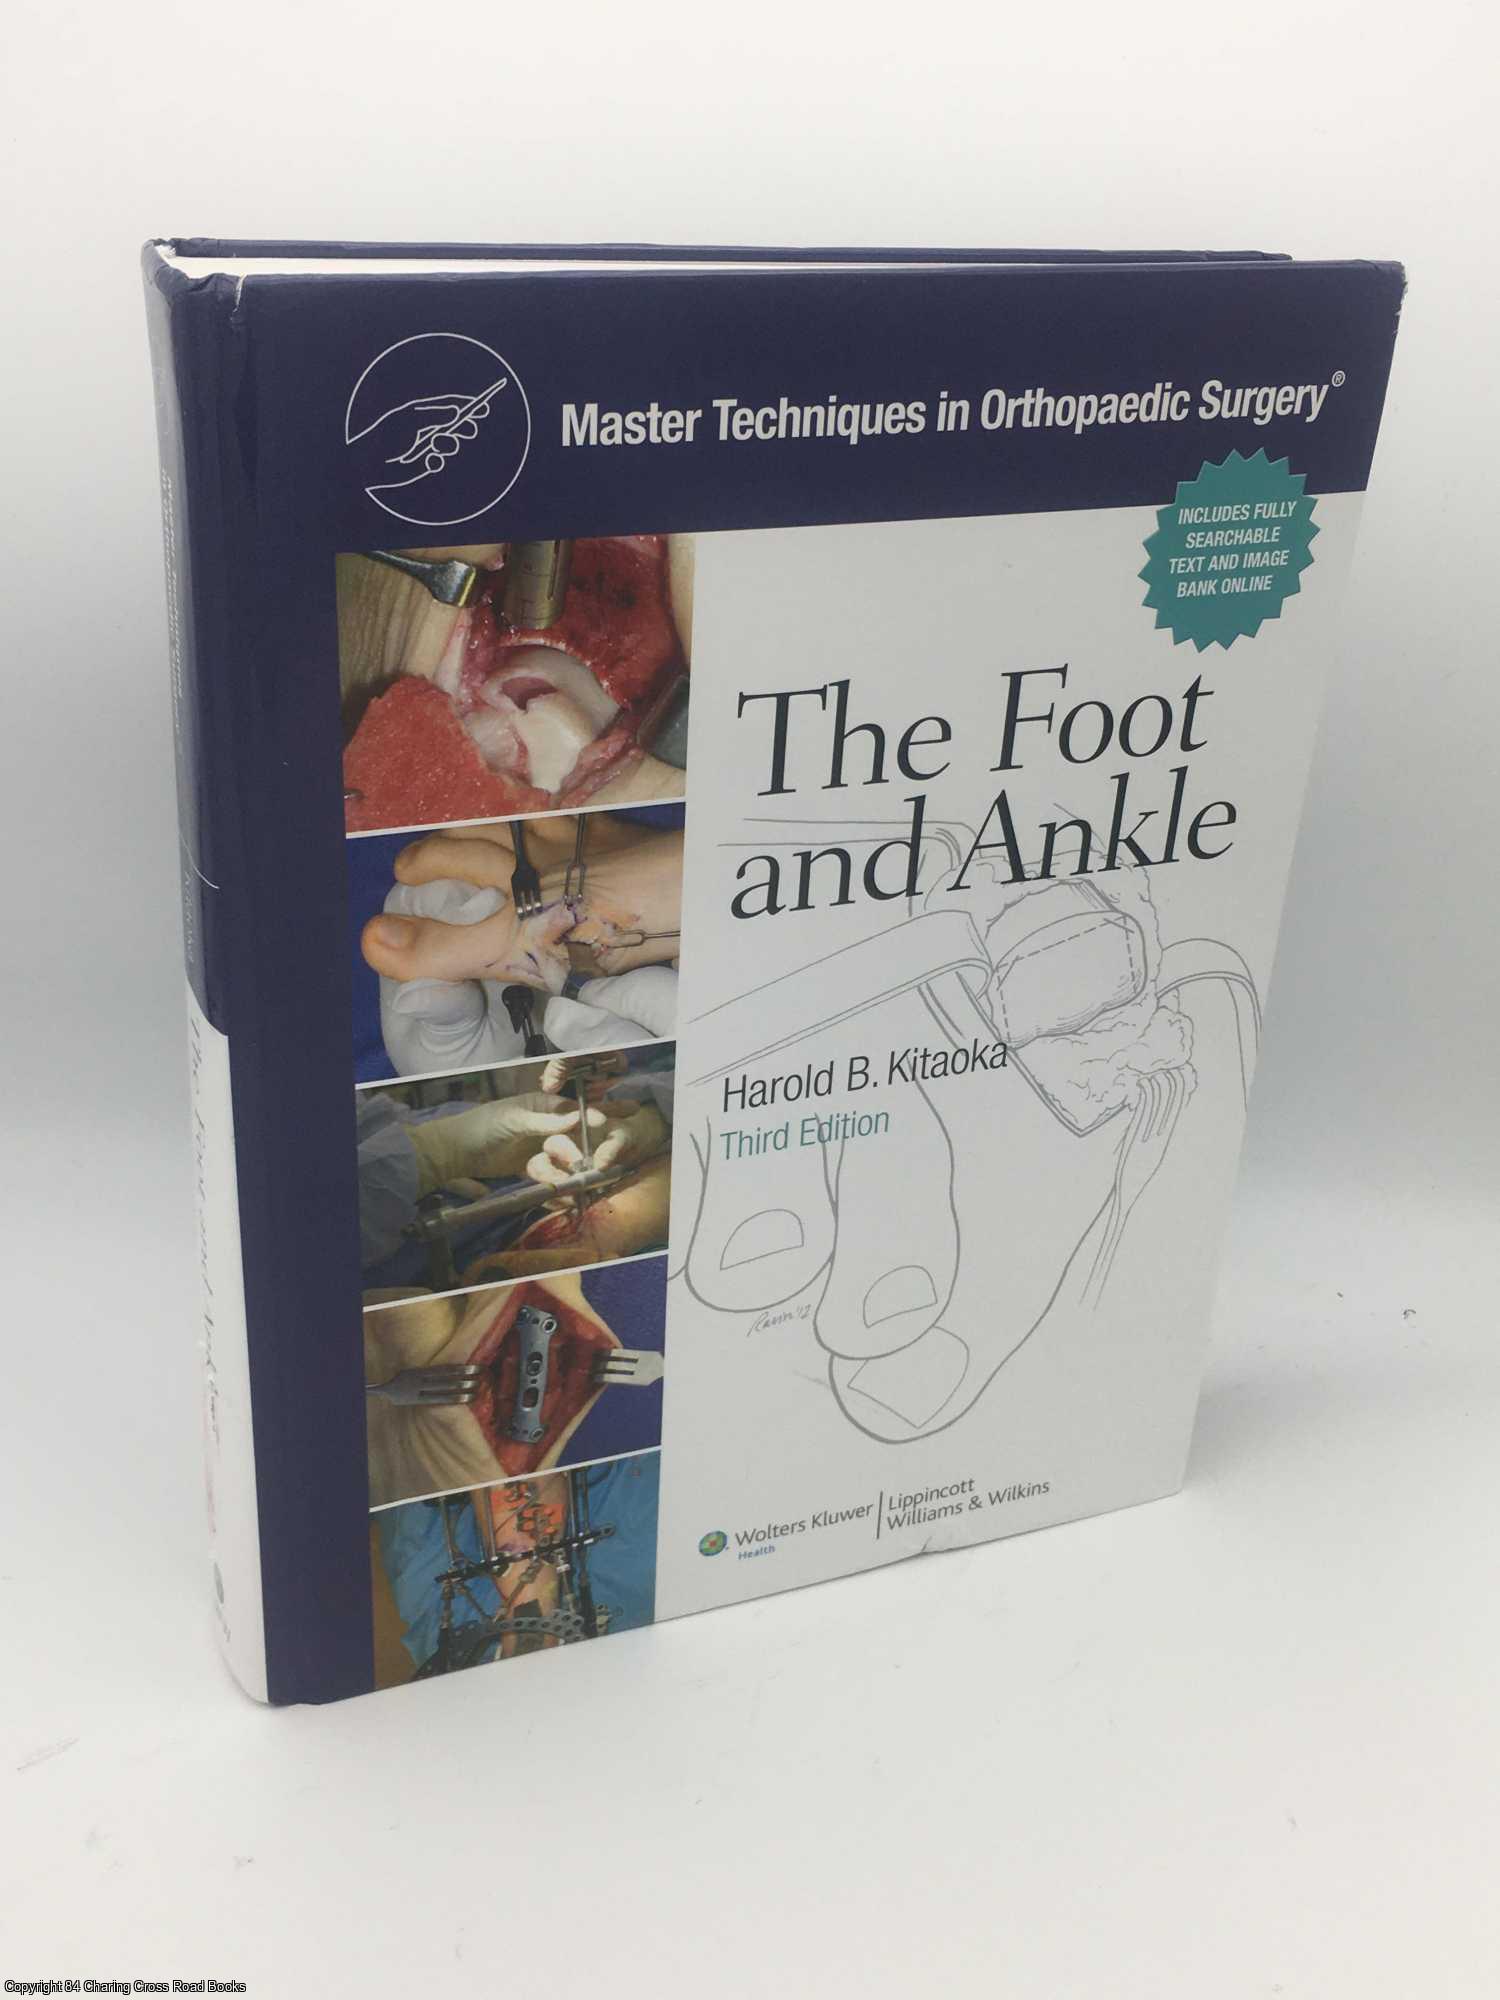 Kitaoka, Harold - Master Techniques in Orthopaedic Surgery: The Foot and Ankle